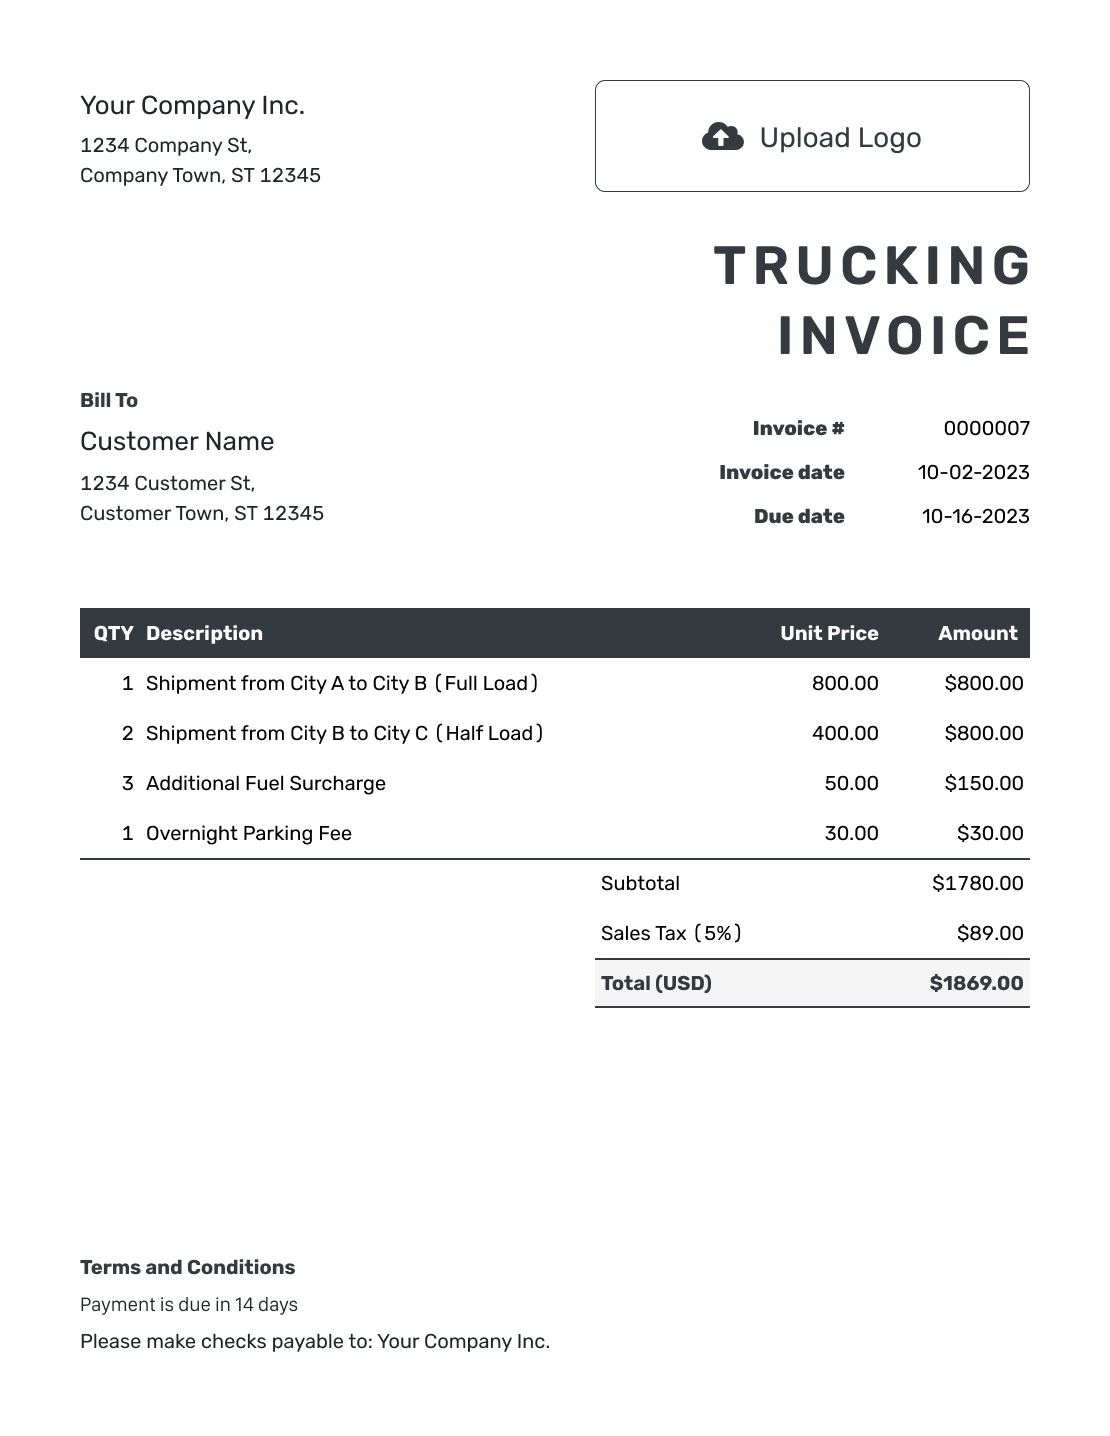 Hourly Trucking Invoice Template